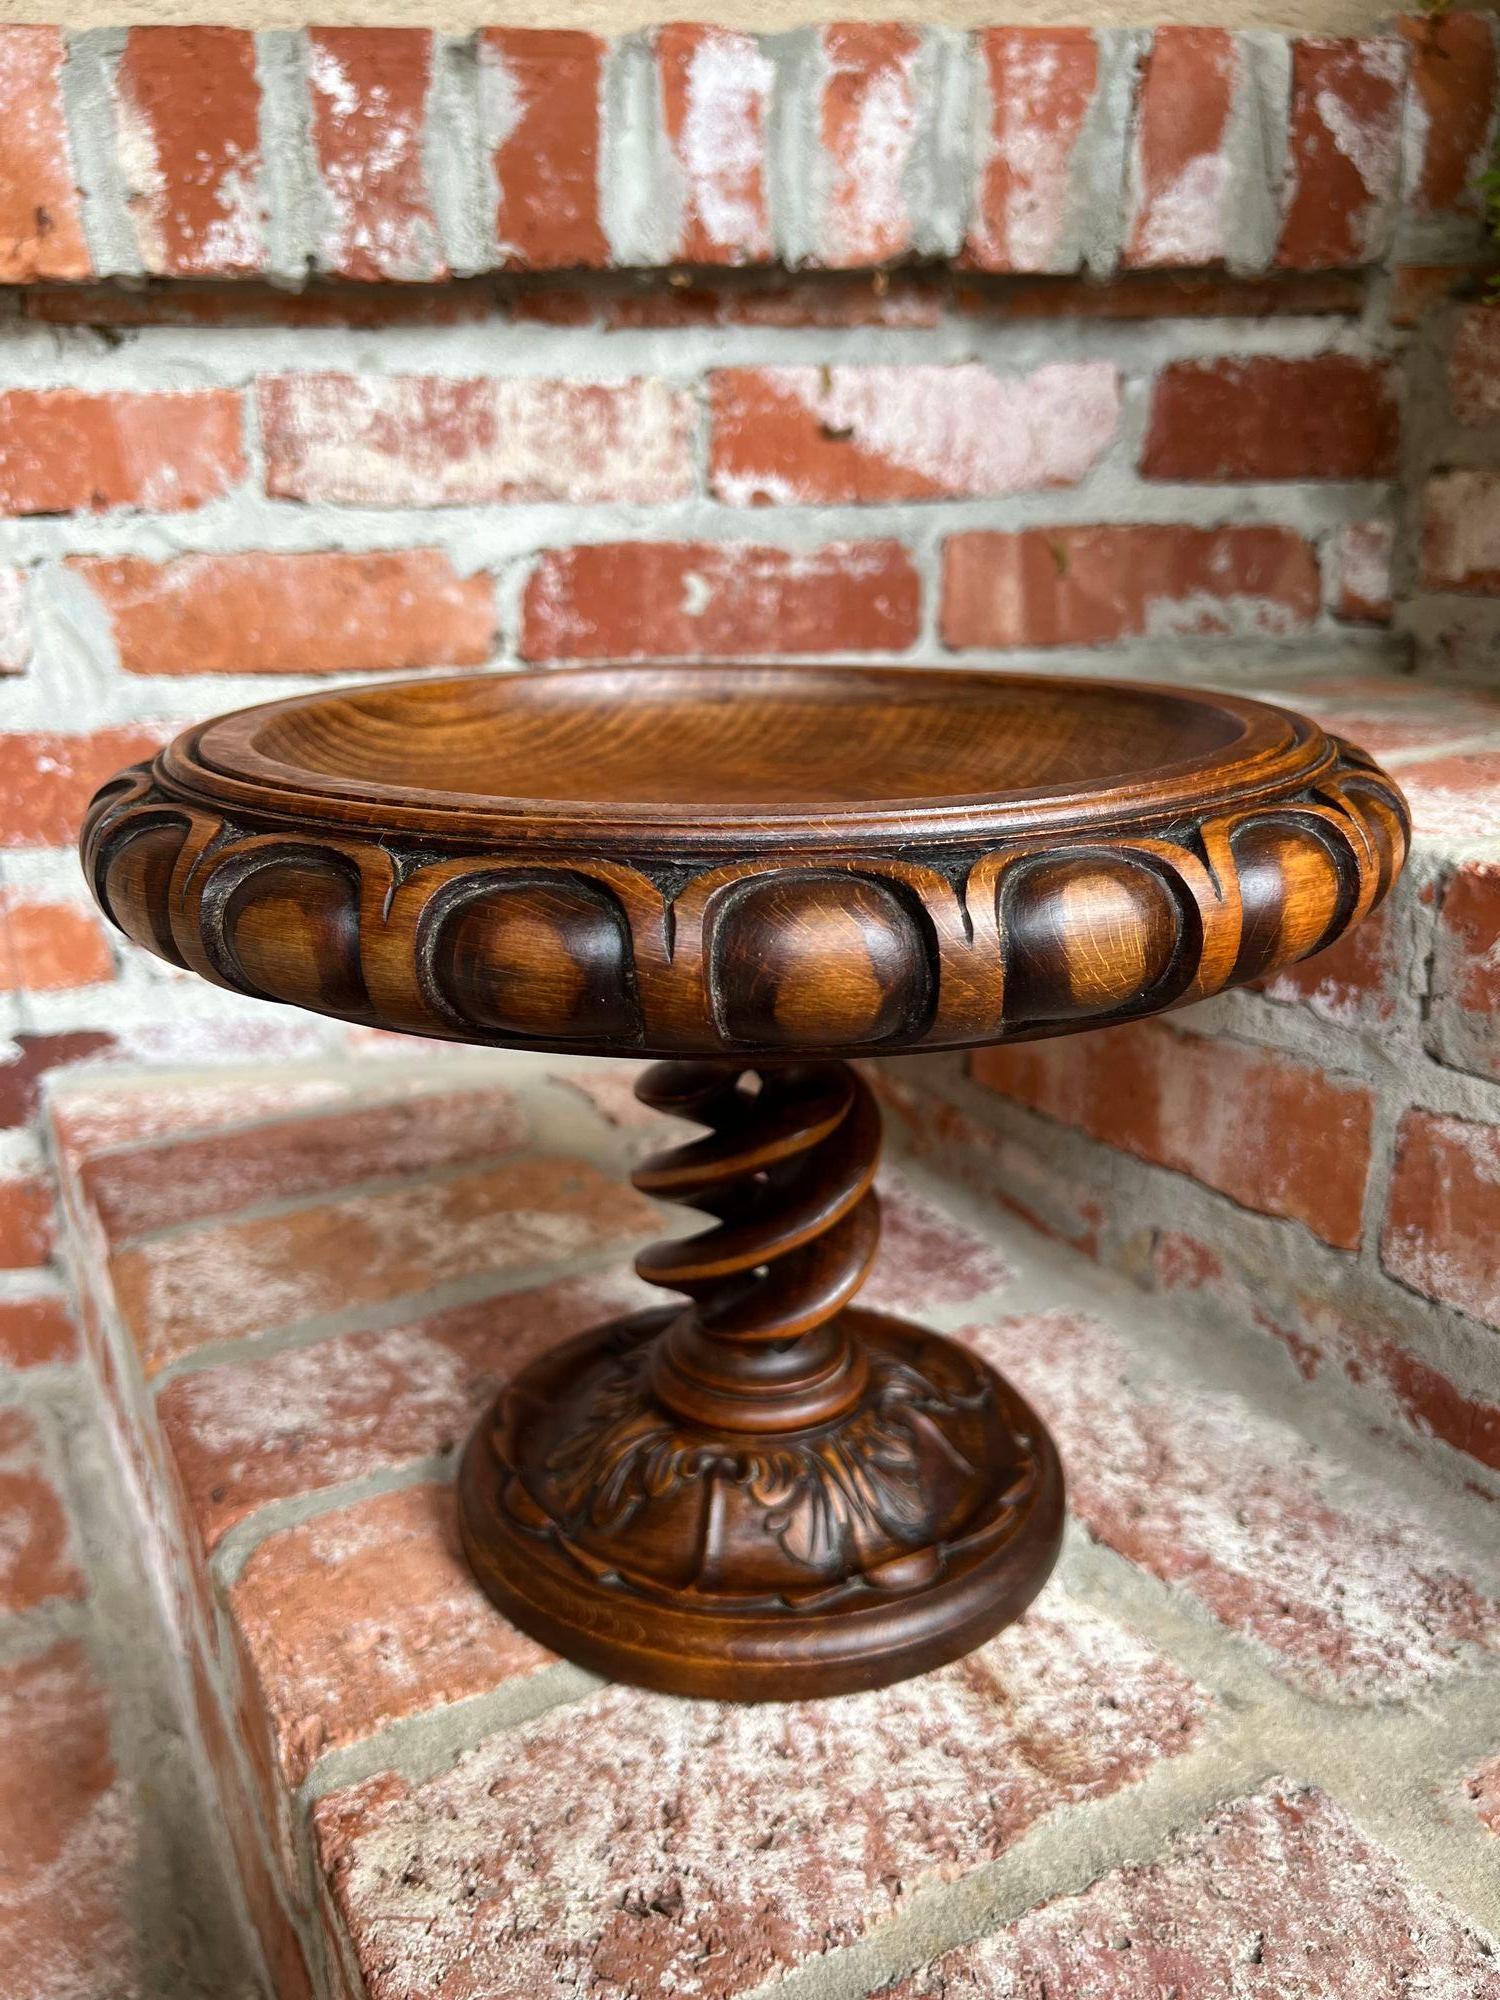 Antique English Oak OPEN Barley Twist Compote Pedestal Bowl Floral Dessert Stand.

Direct from England, a stunning antique English oak barley twist compote. Oversized, carved bowl edge, OPEN barley twist pedestal, and relief carved base make this